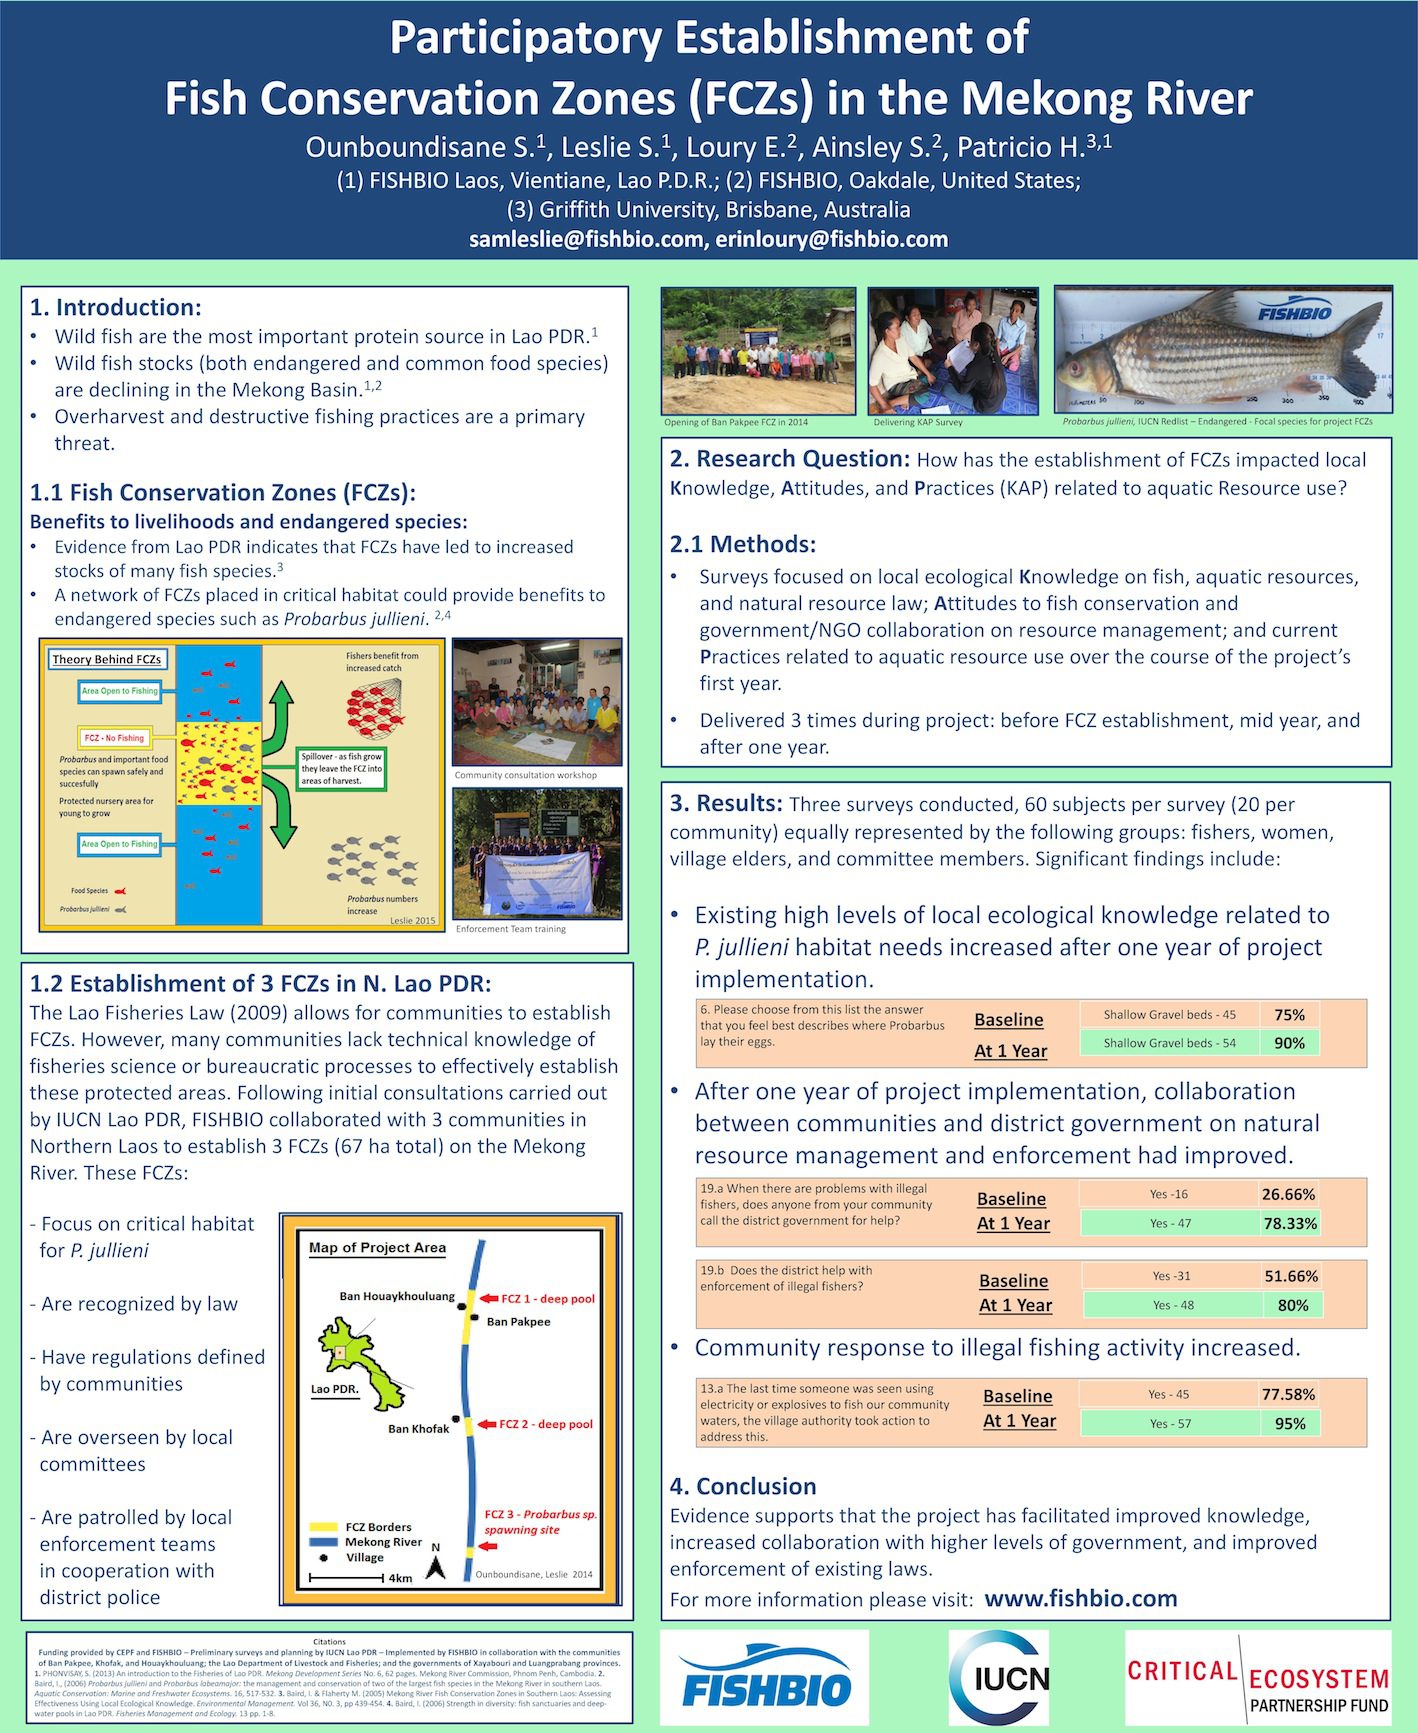 FISHBIO FCZ Poster for ICCB